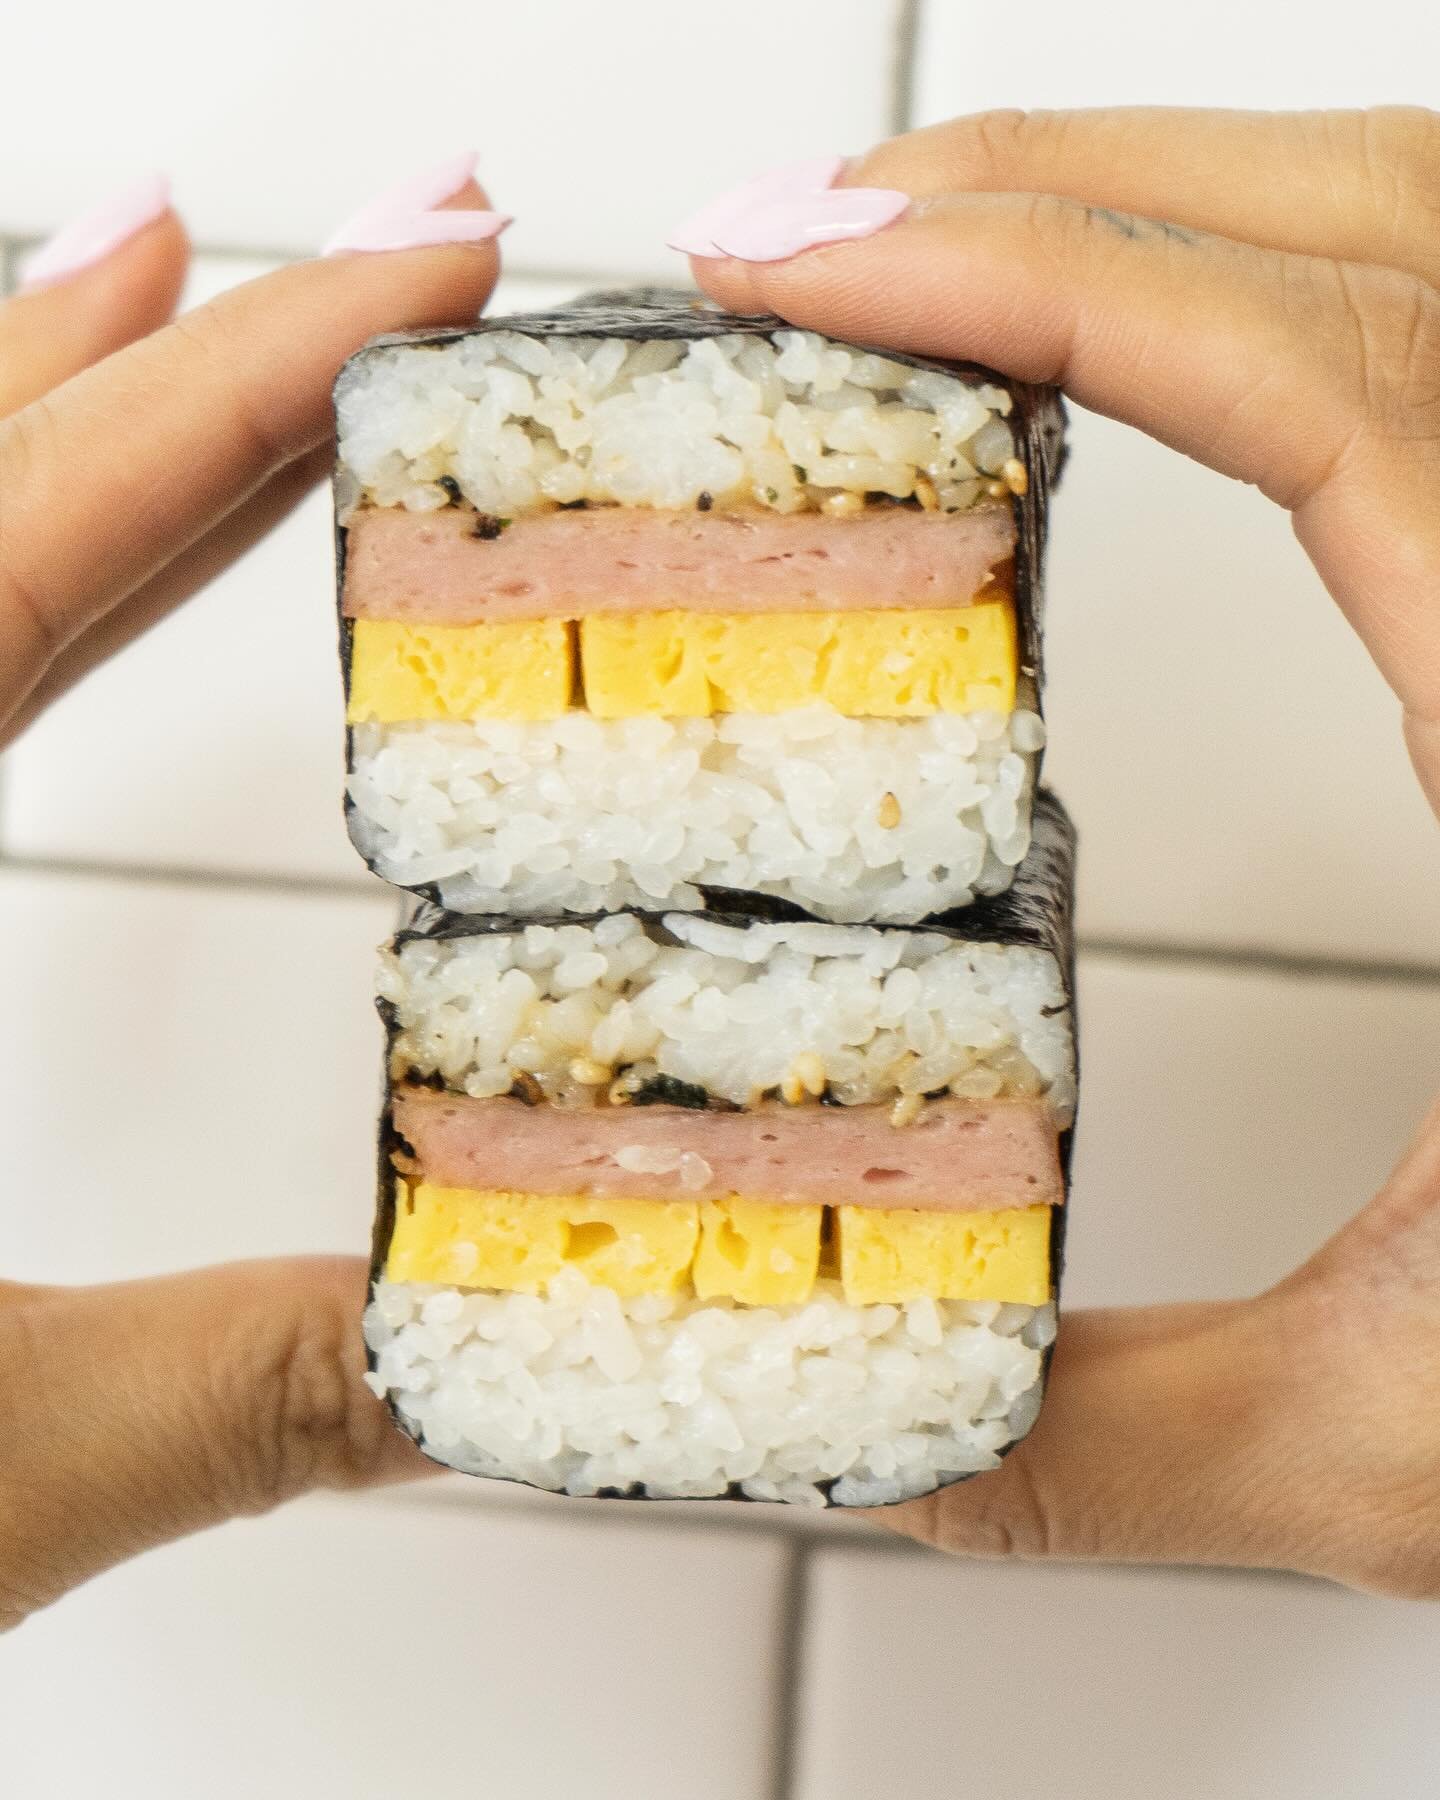 Fridays are for spam musubis! 🍙 who&rsquo;s joining us for lunch today? 

📍2626 W La Palma Ave, Anaheim, CA
⏰ 10A-8:30P
#musubisquare